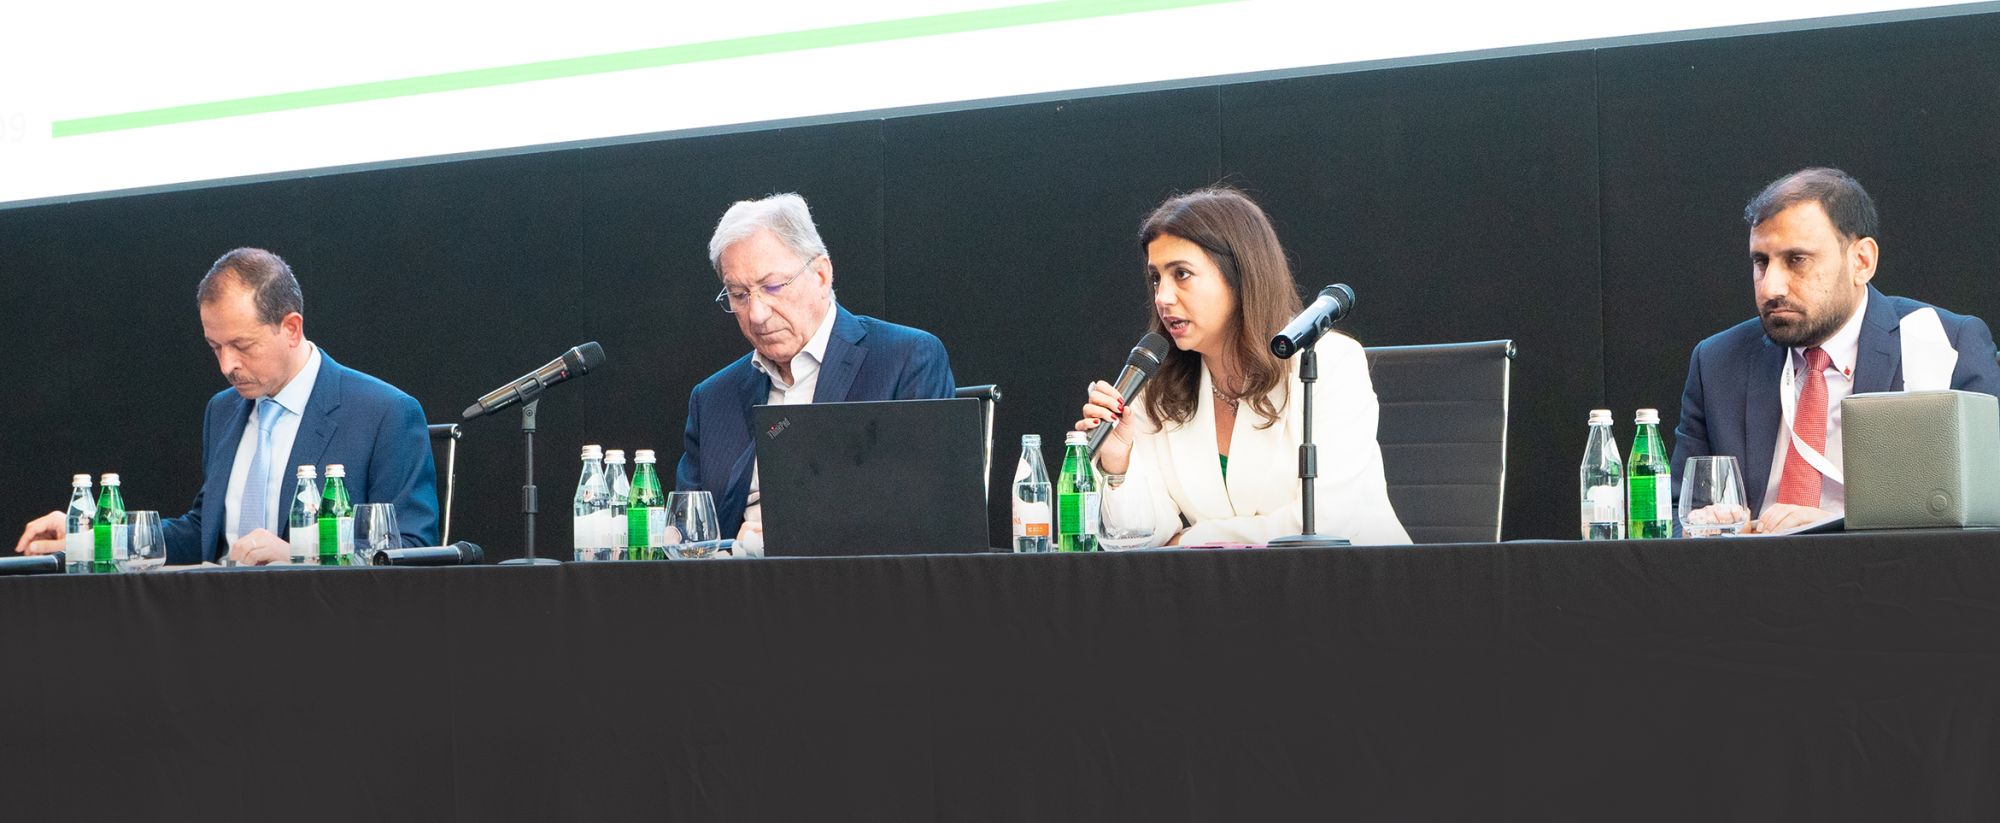 Multiply Group reflects on its year of transformation and growth at the Group’s General Assembly Meeting; sets priorities for 2023